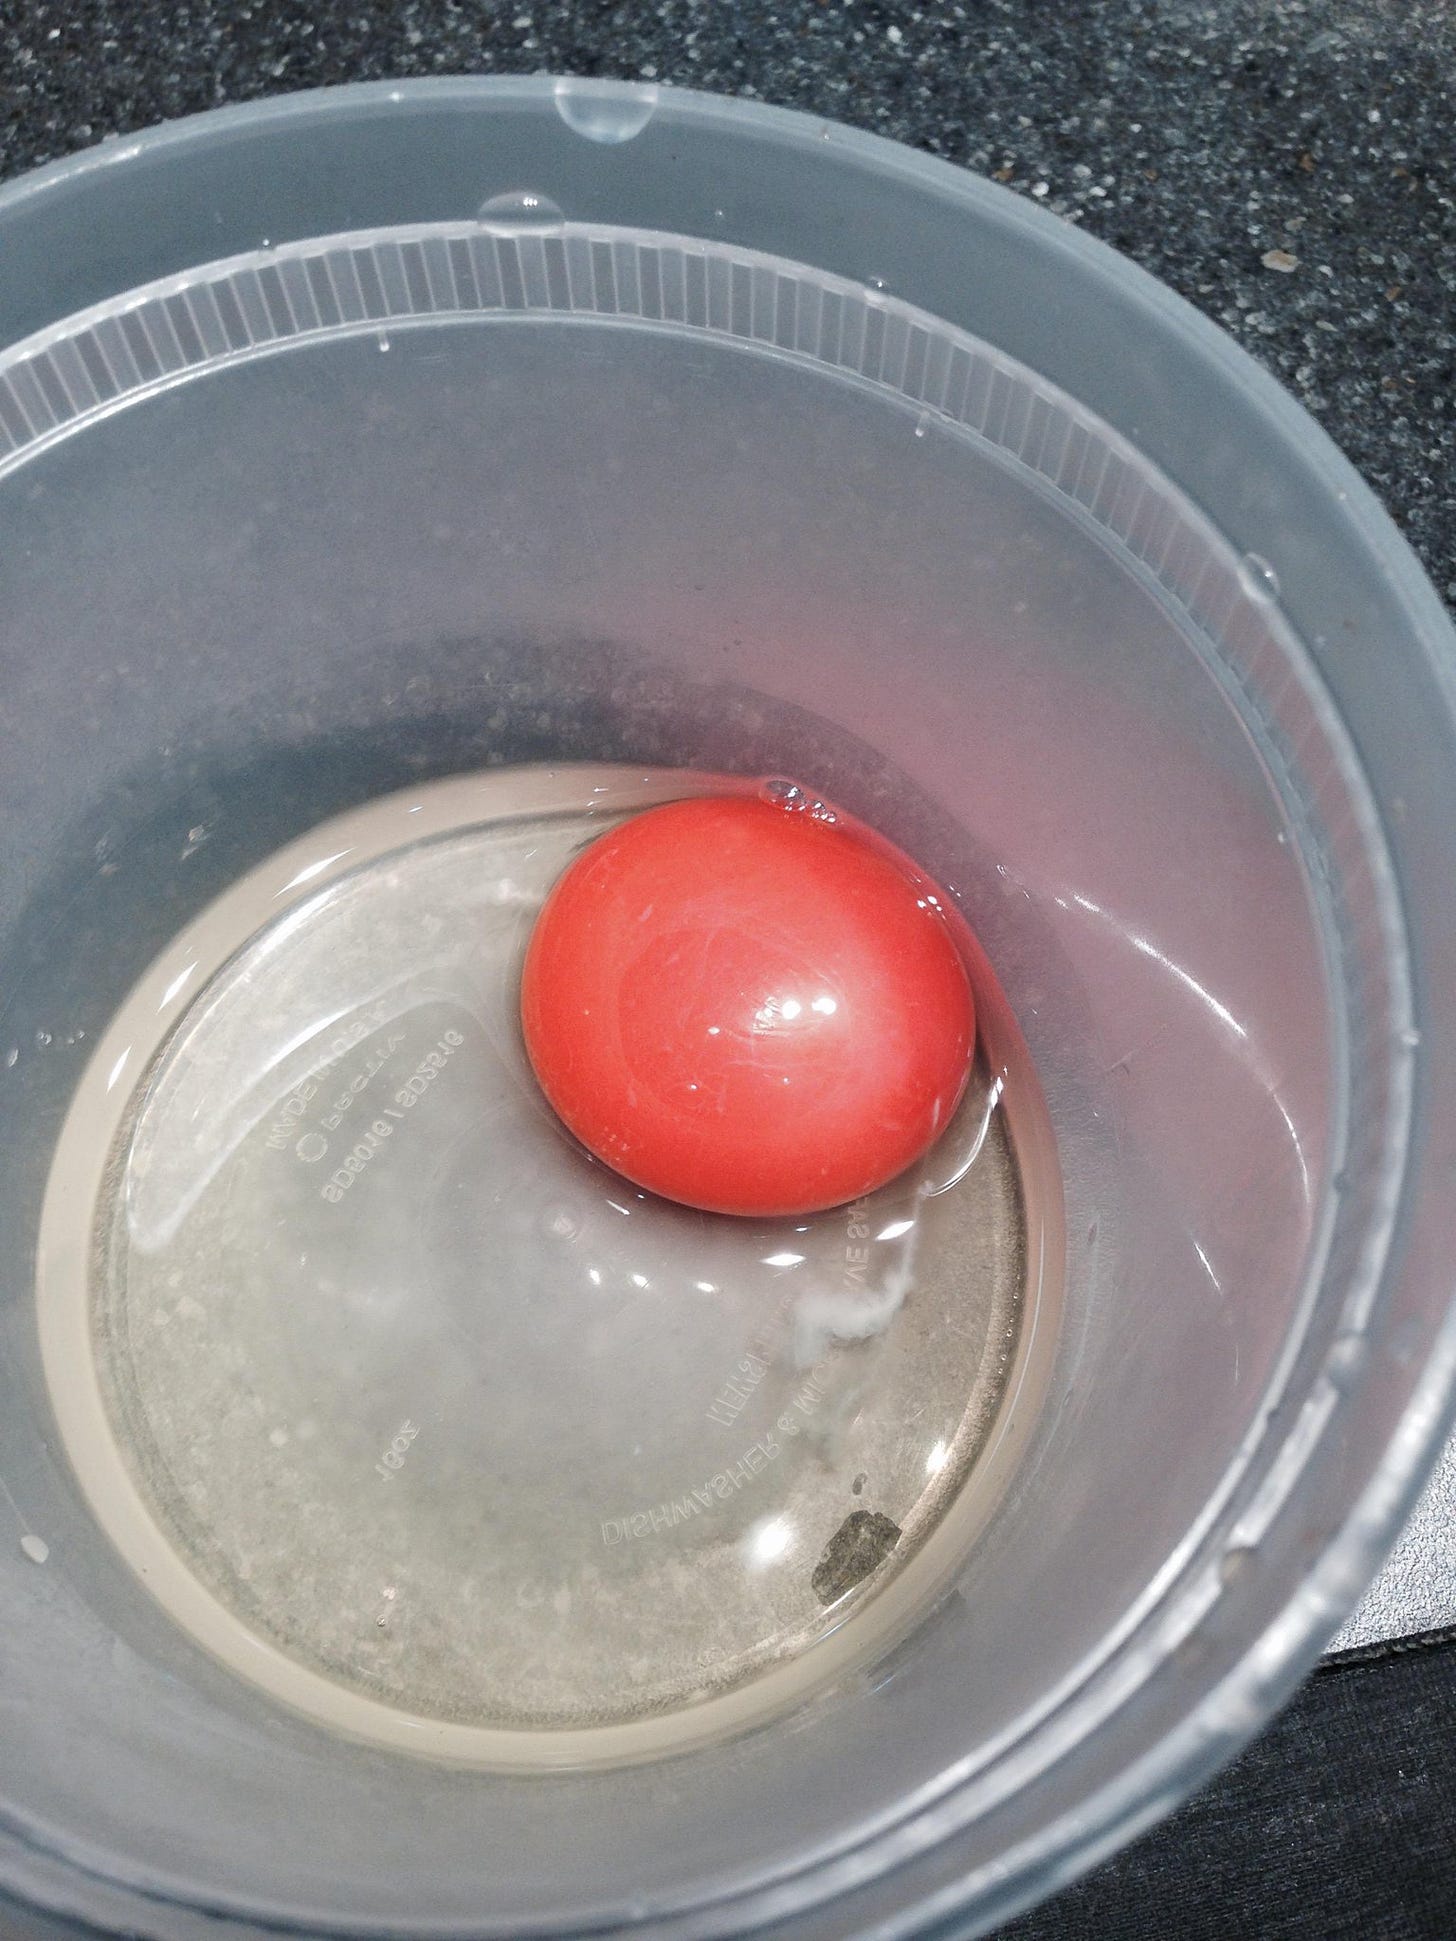 Dan Barber on Twitter: &quot;a “red pepper egg” from laying hens fed  high-carotenoid peppers (bred by Michael Mazourek) @bluehillfarm. #nofilter  http://t.co/qMaLjLKPBK&quot;